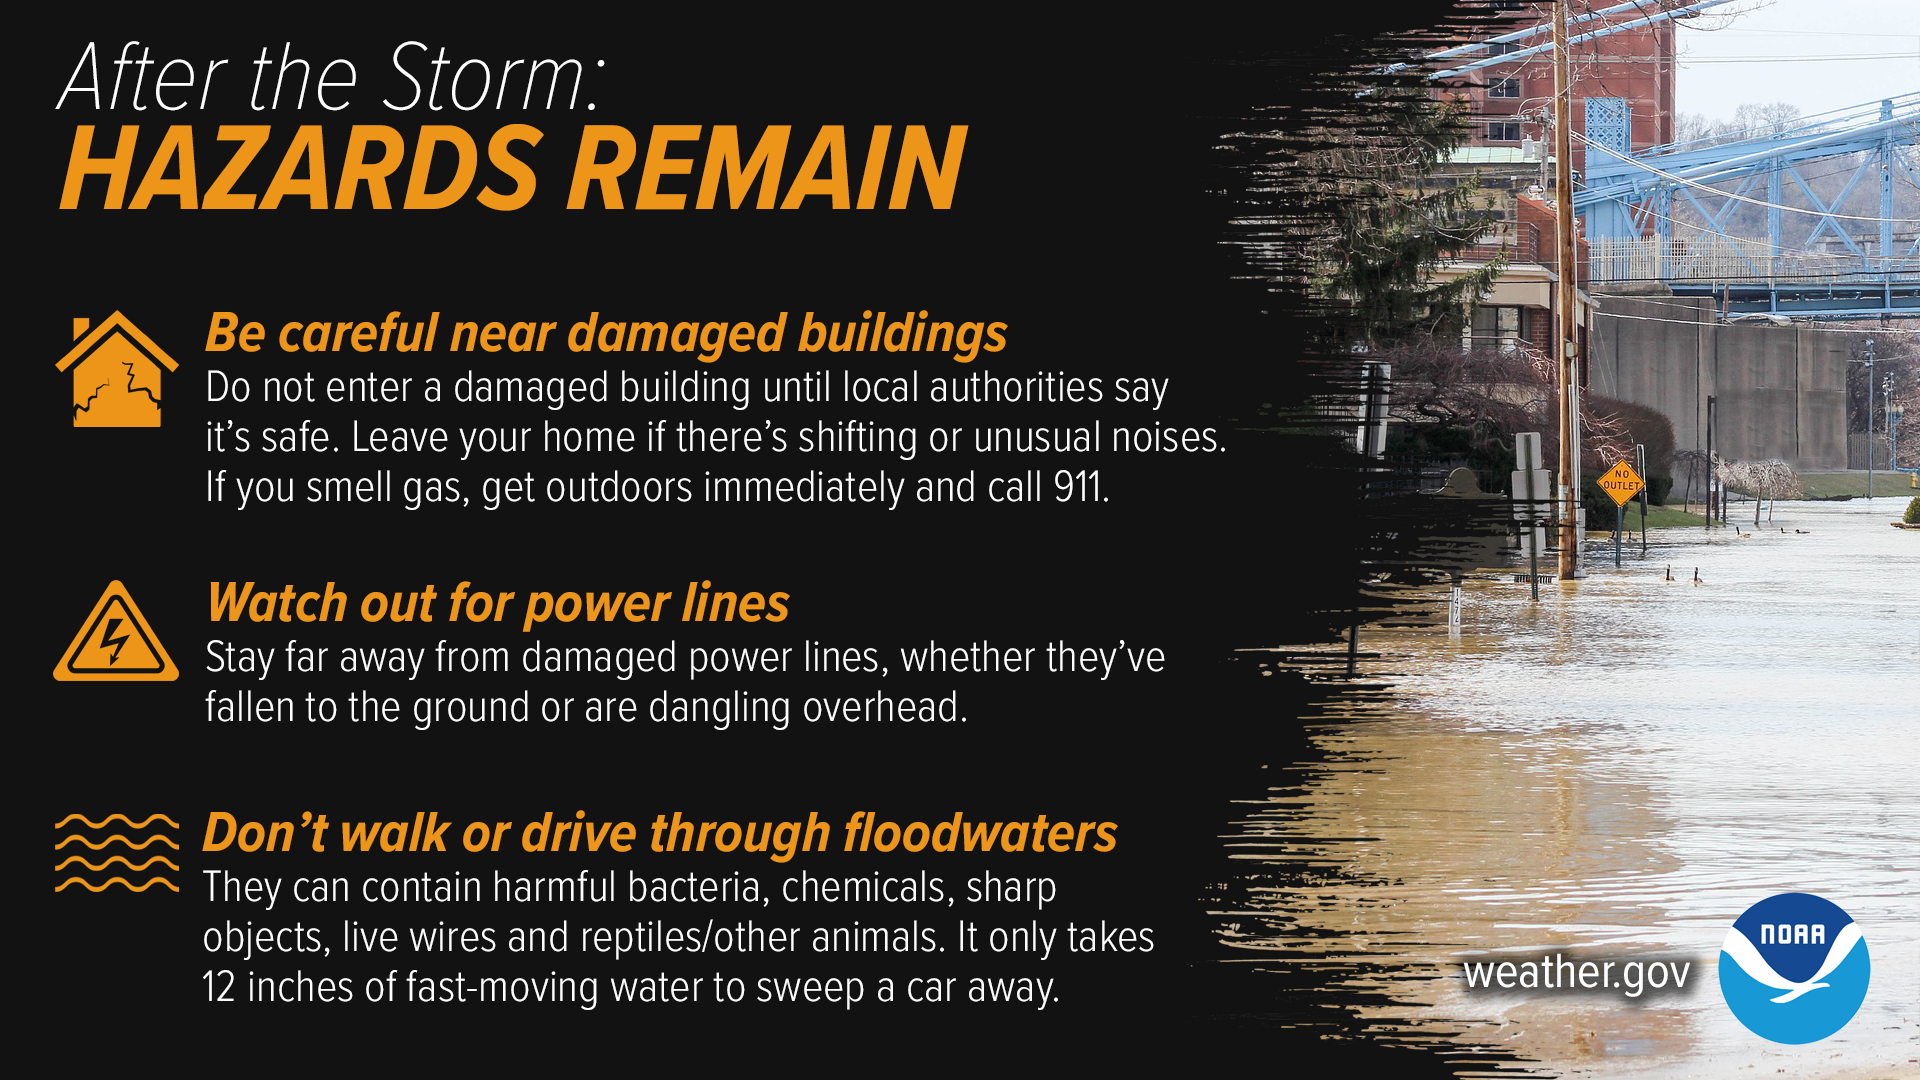 After The Storm: Hazards Remain. 1) Be careful near damaged buildings. Do not enter a damaged building until local authorities say it's afe. Leave your home if there's shifting or unusual noises. If you smell gas, get outdoors immediately and call 911. 2) Watch out for power lines. Stay far away from damaged power lines, whether they've fallen to the ground or are dangling overheard. 3) Don't walk or drive through floodwaters. They can contain harmful bacteria, chemicals, sharp objects, live wires and reptiles/other animals. It only takes 12 inches of fast-moving water to sweep a car away.